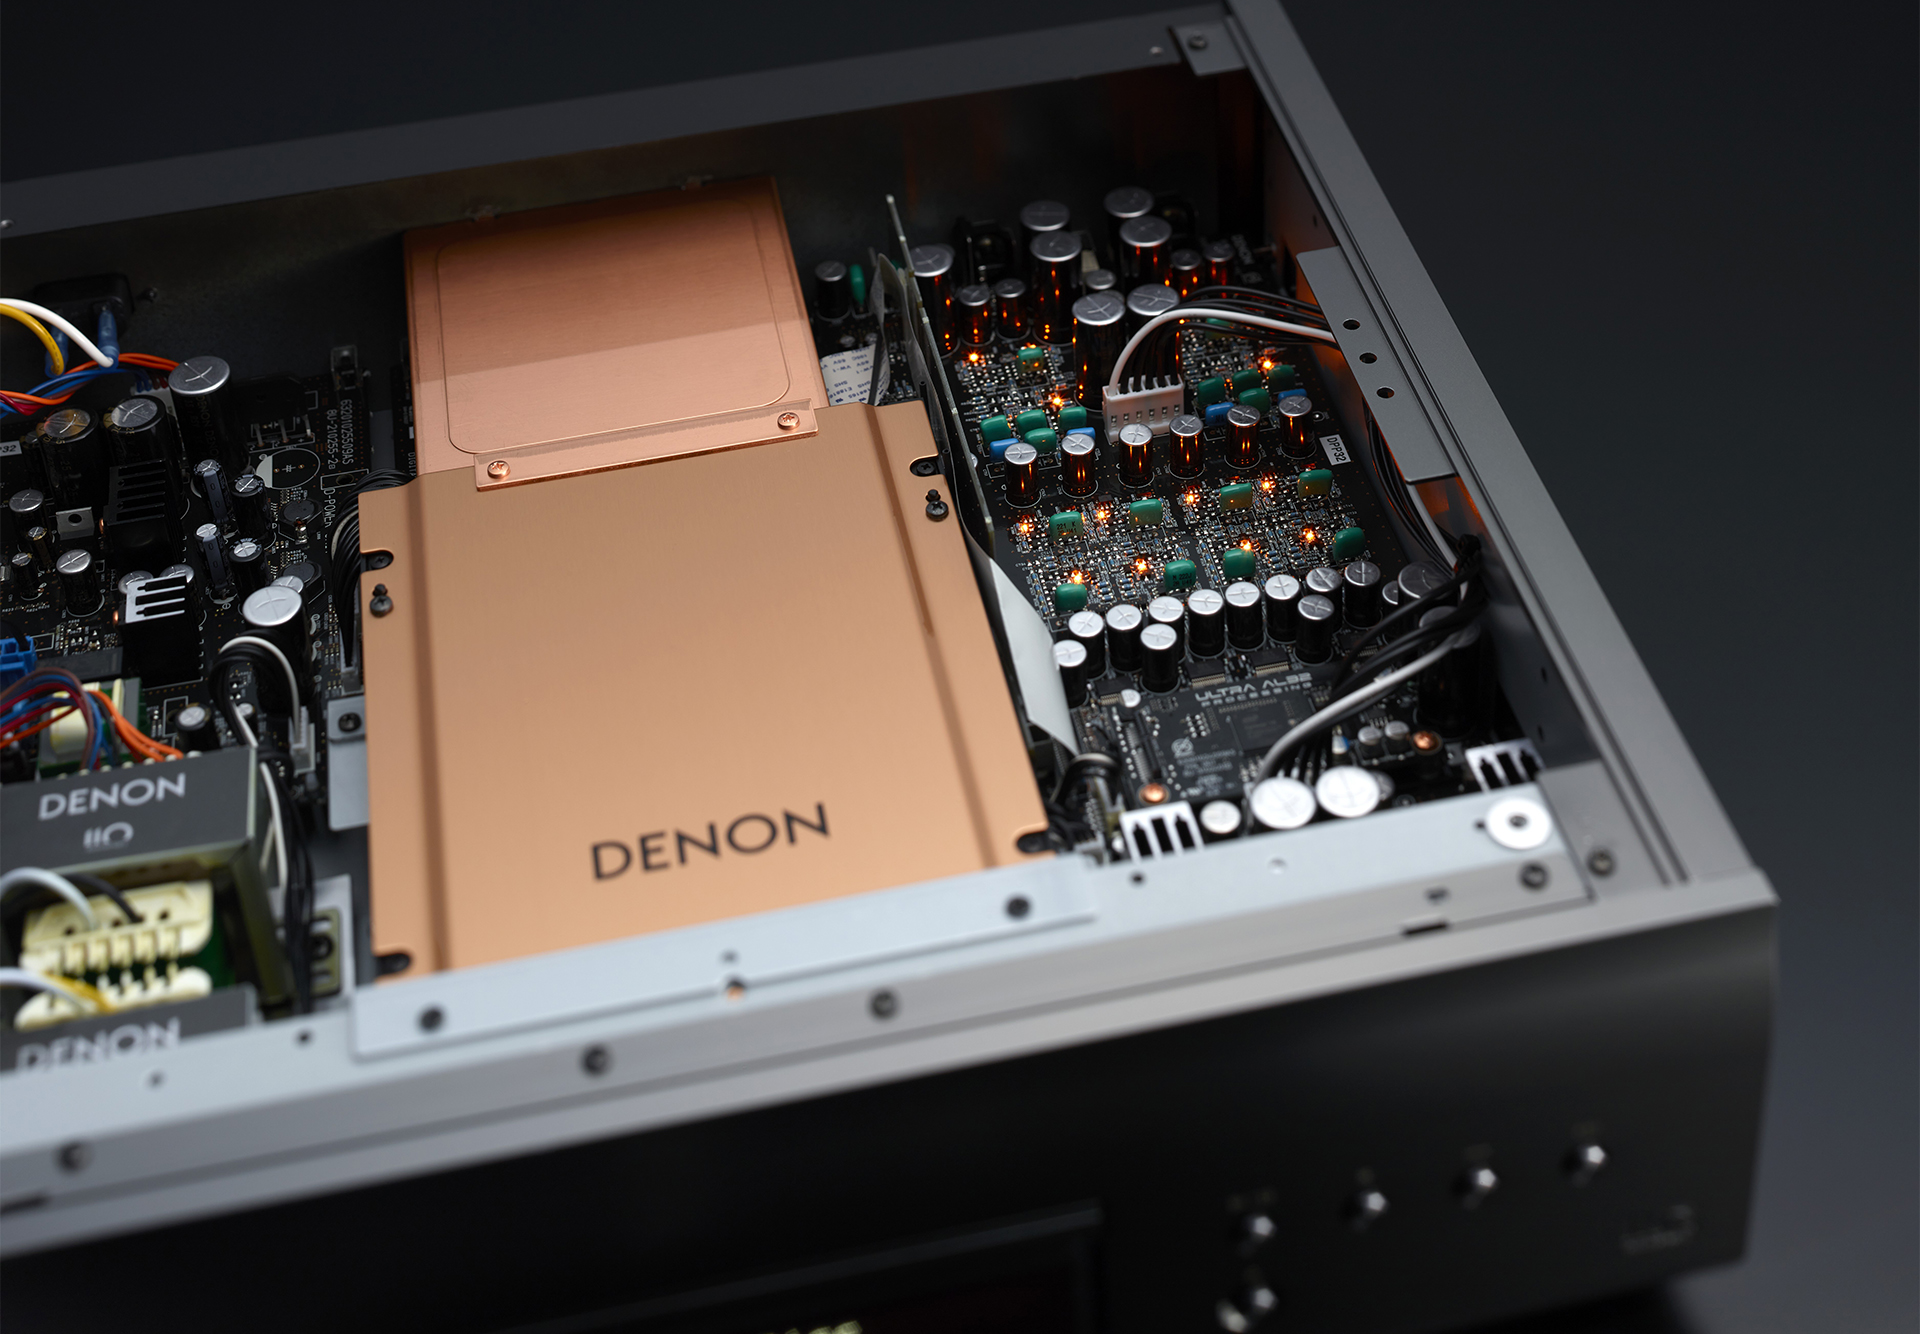 Review Denon Dcd A110 In Honor Of Your Cds